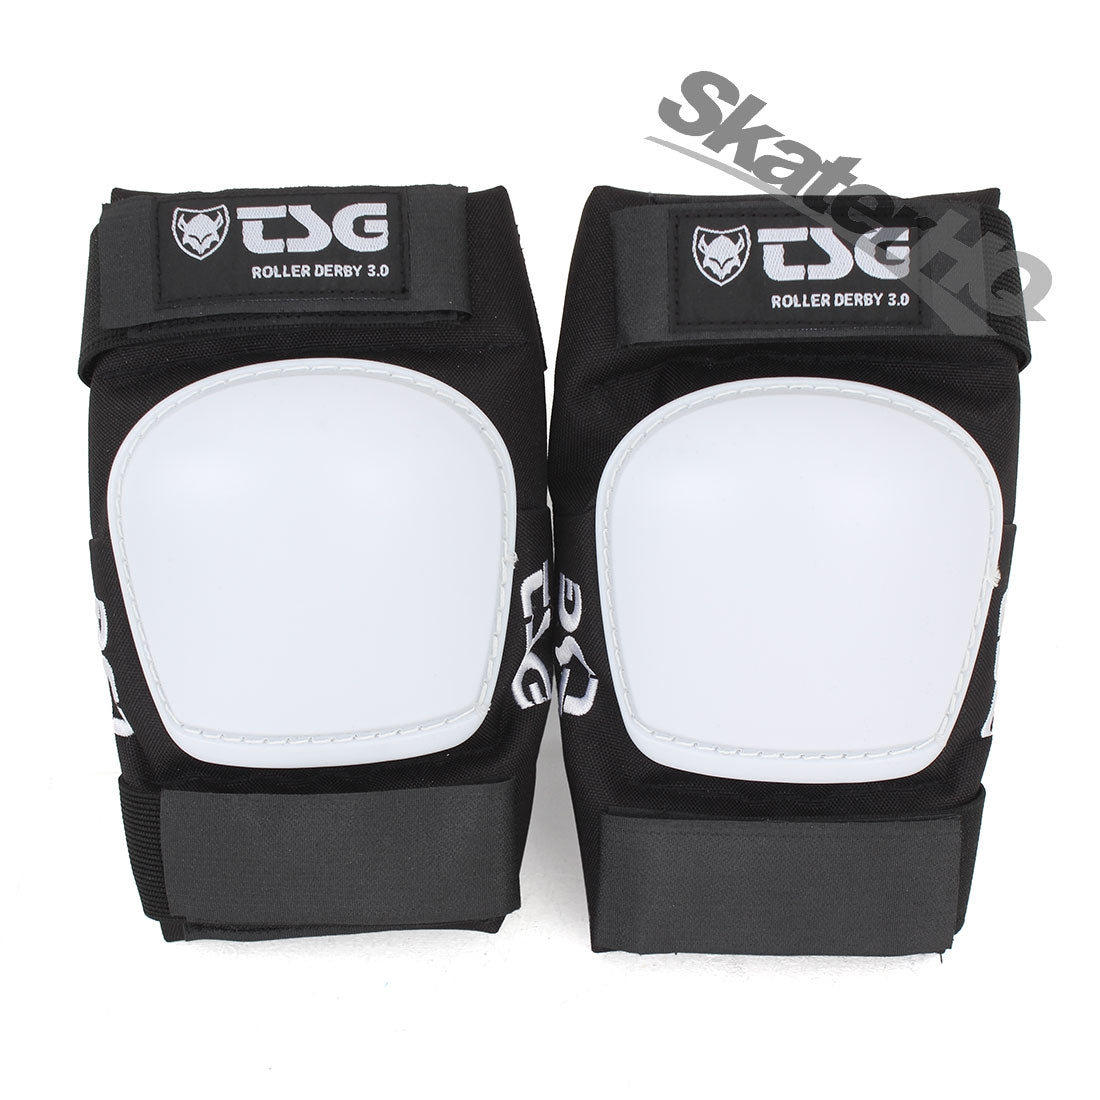 TSG Rollerderby Elbow 3.0 - Small Protective Gear